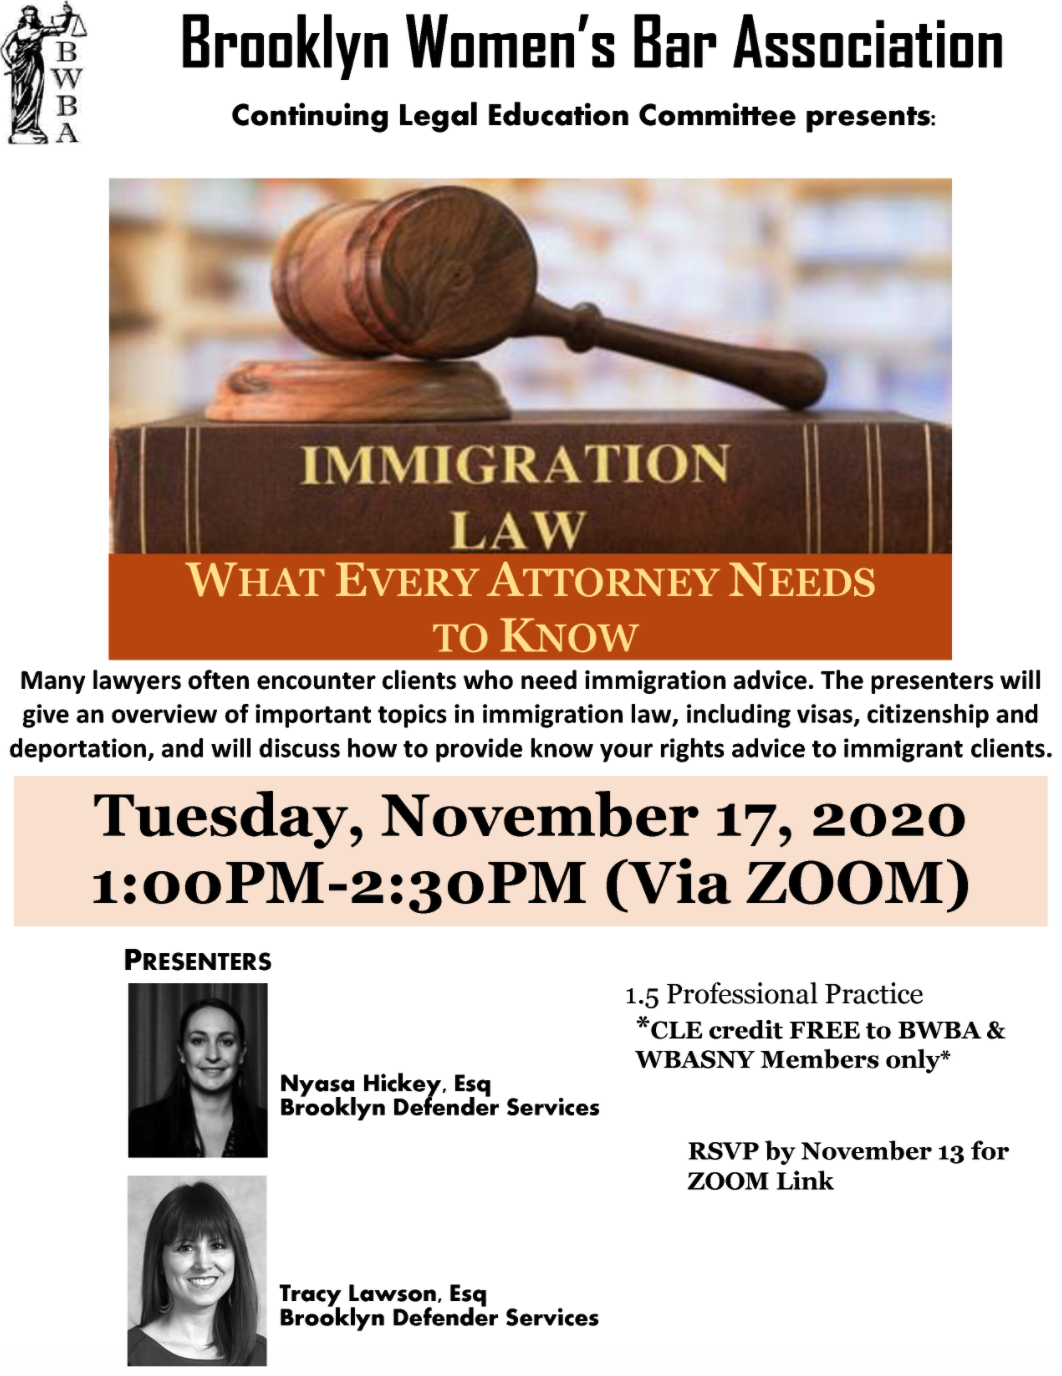 Brooklyn Women's Bar Association Presents Immigration Law CLE What